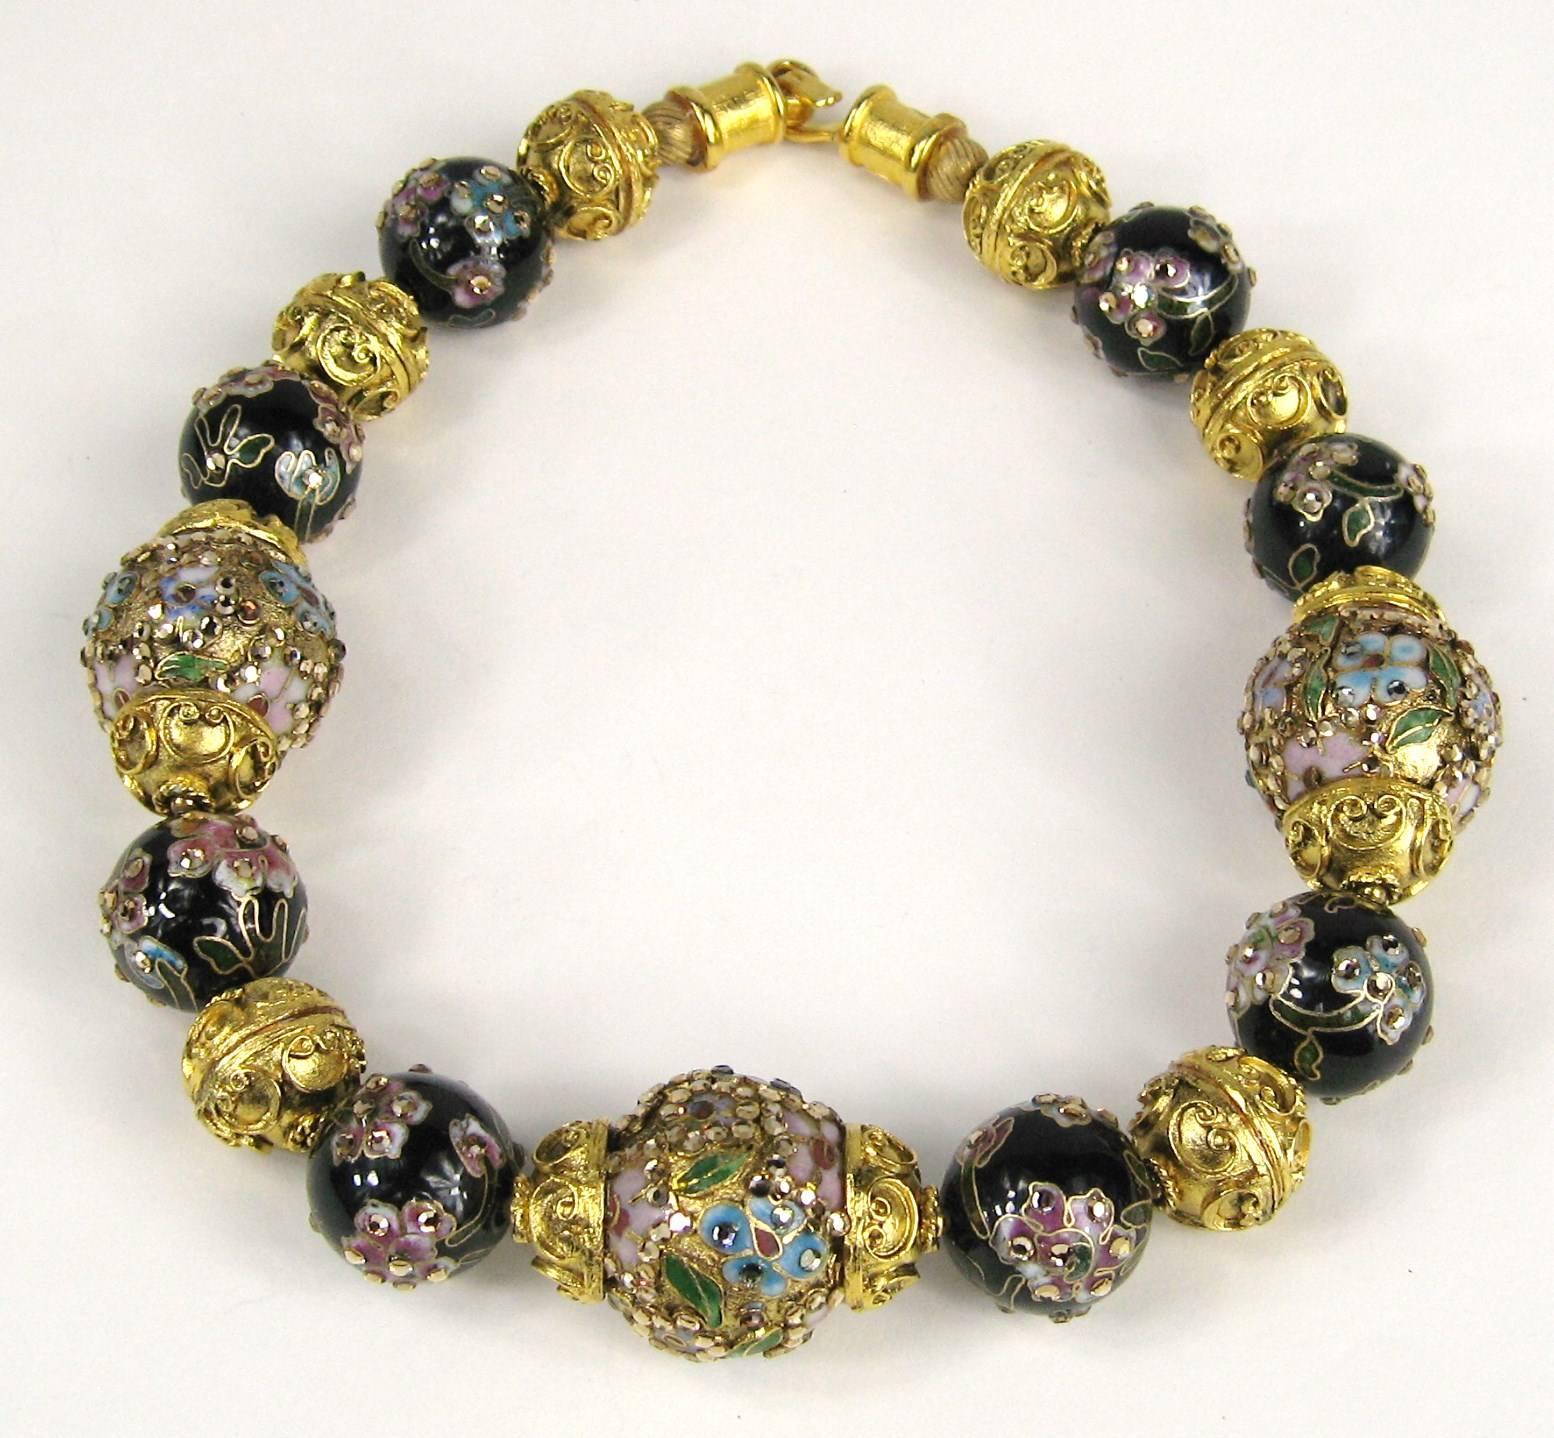 Stunning designer signed Jose & Maria Barrera couture gold plated and ceramic floral statement necklace. Large two tone enameled beads, lovely pastel which a contrasting black bead. Then you have an ornate gold bead. Beads measures 25.97 mm on the